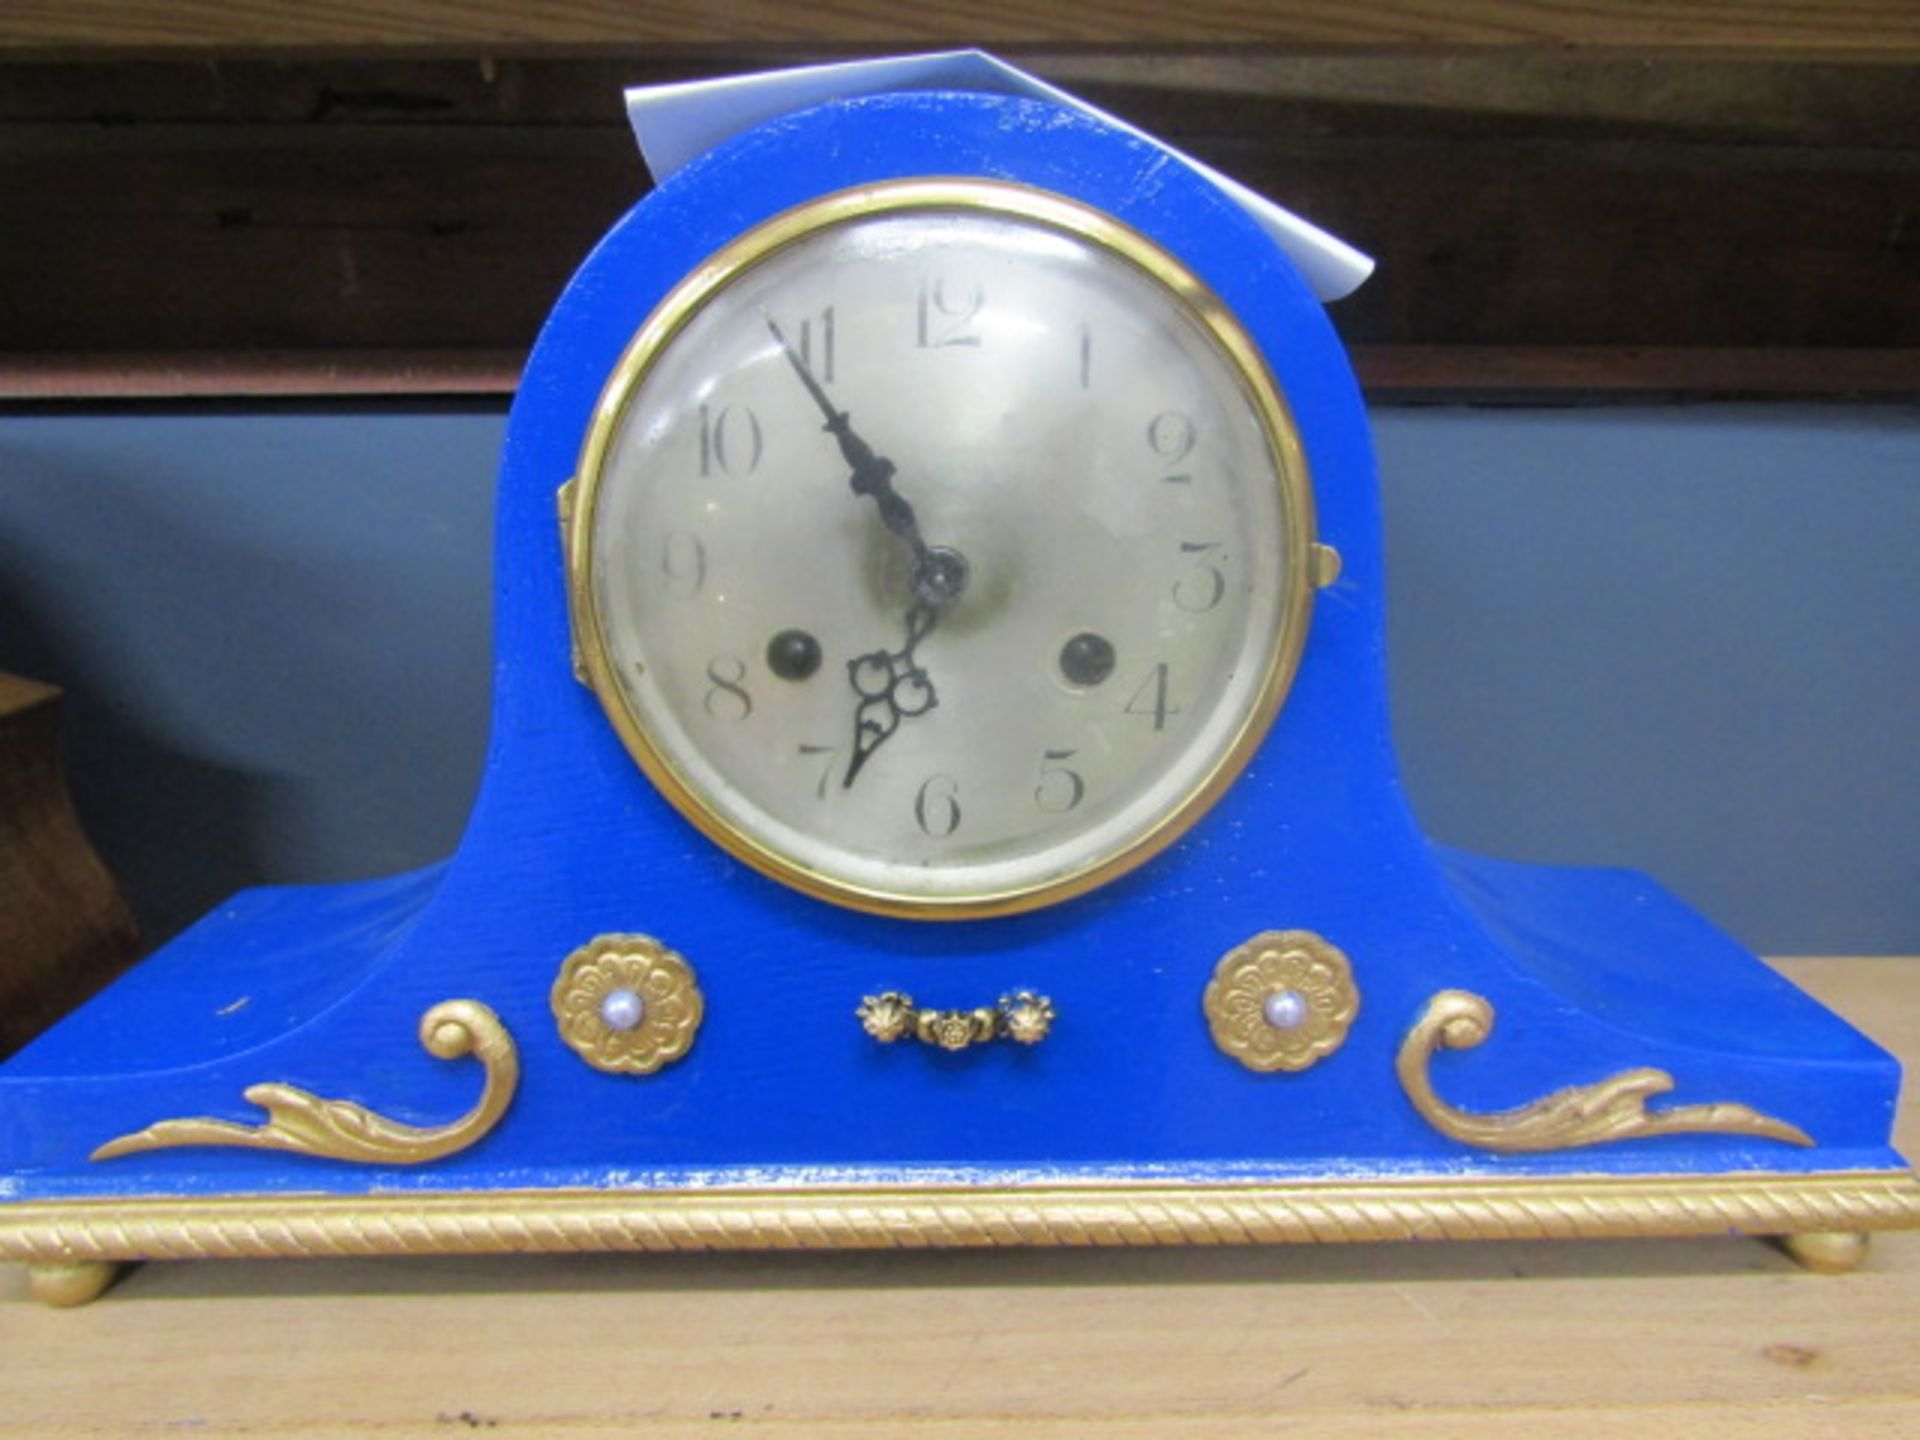 Napoleon mantle clock painted blue in working order with key